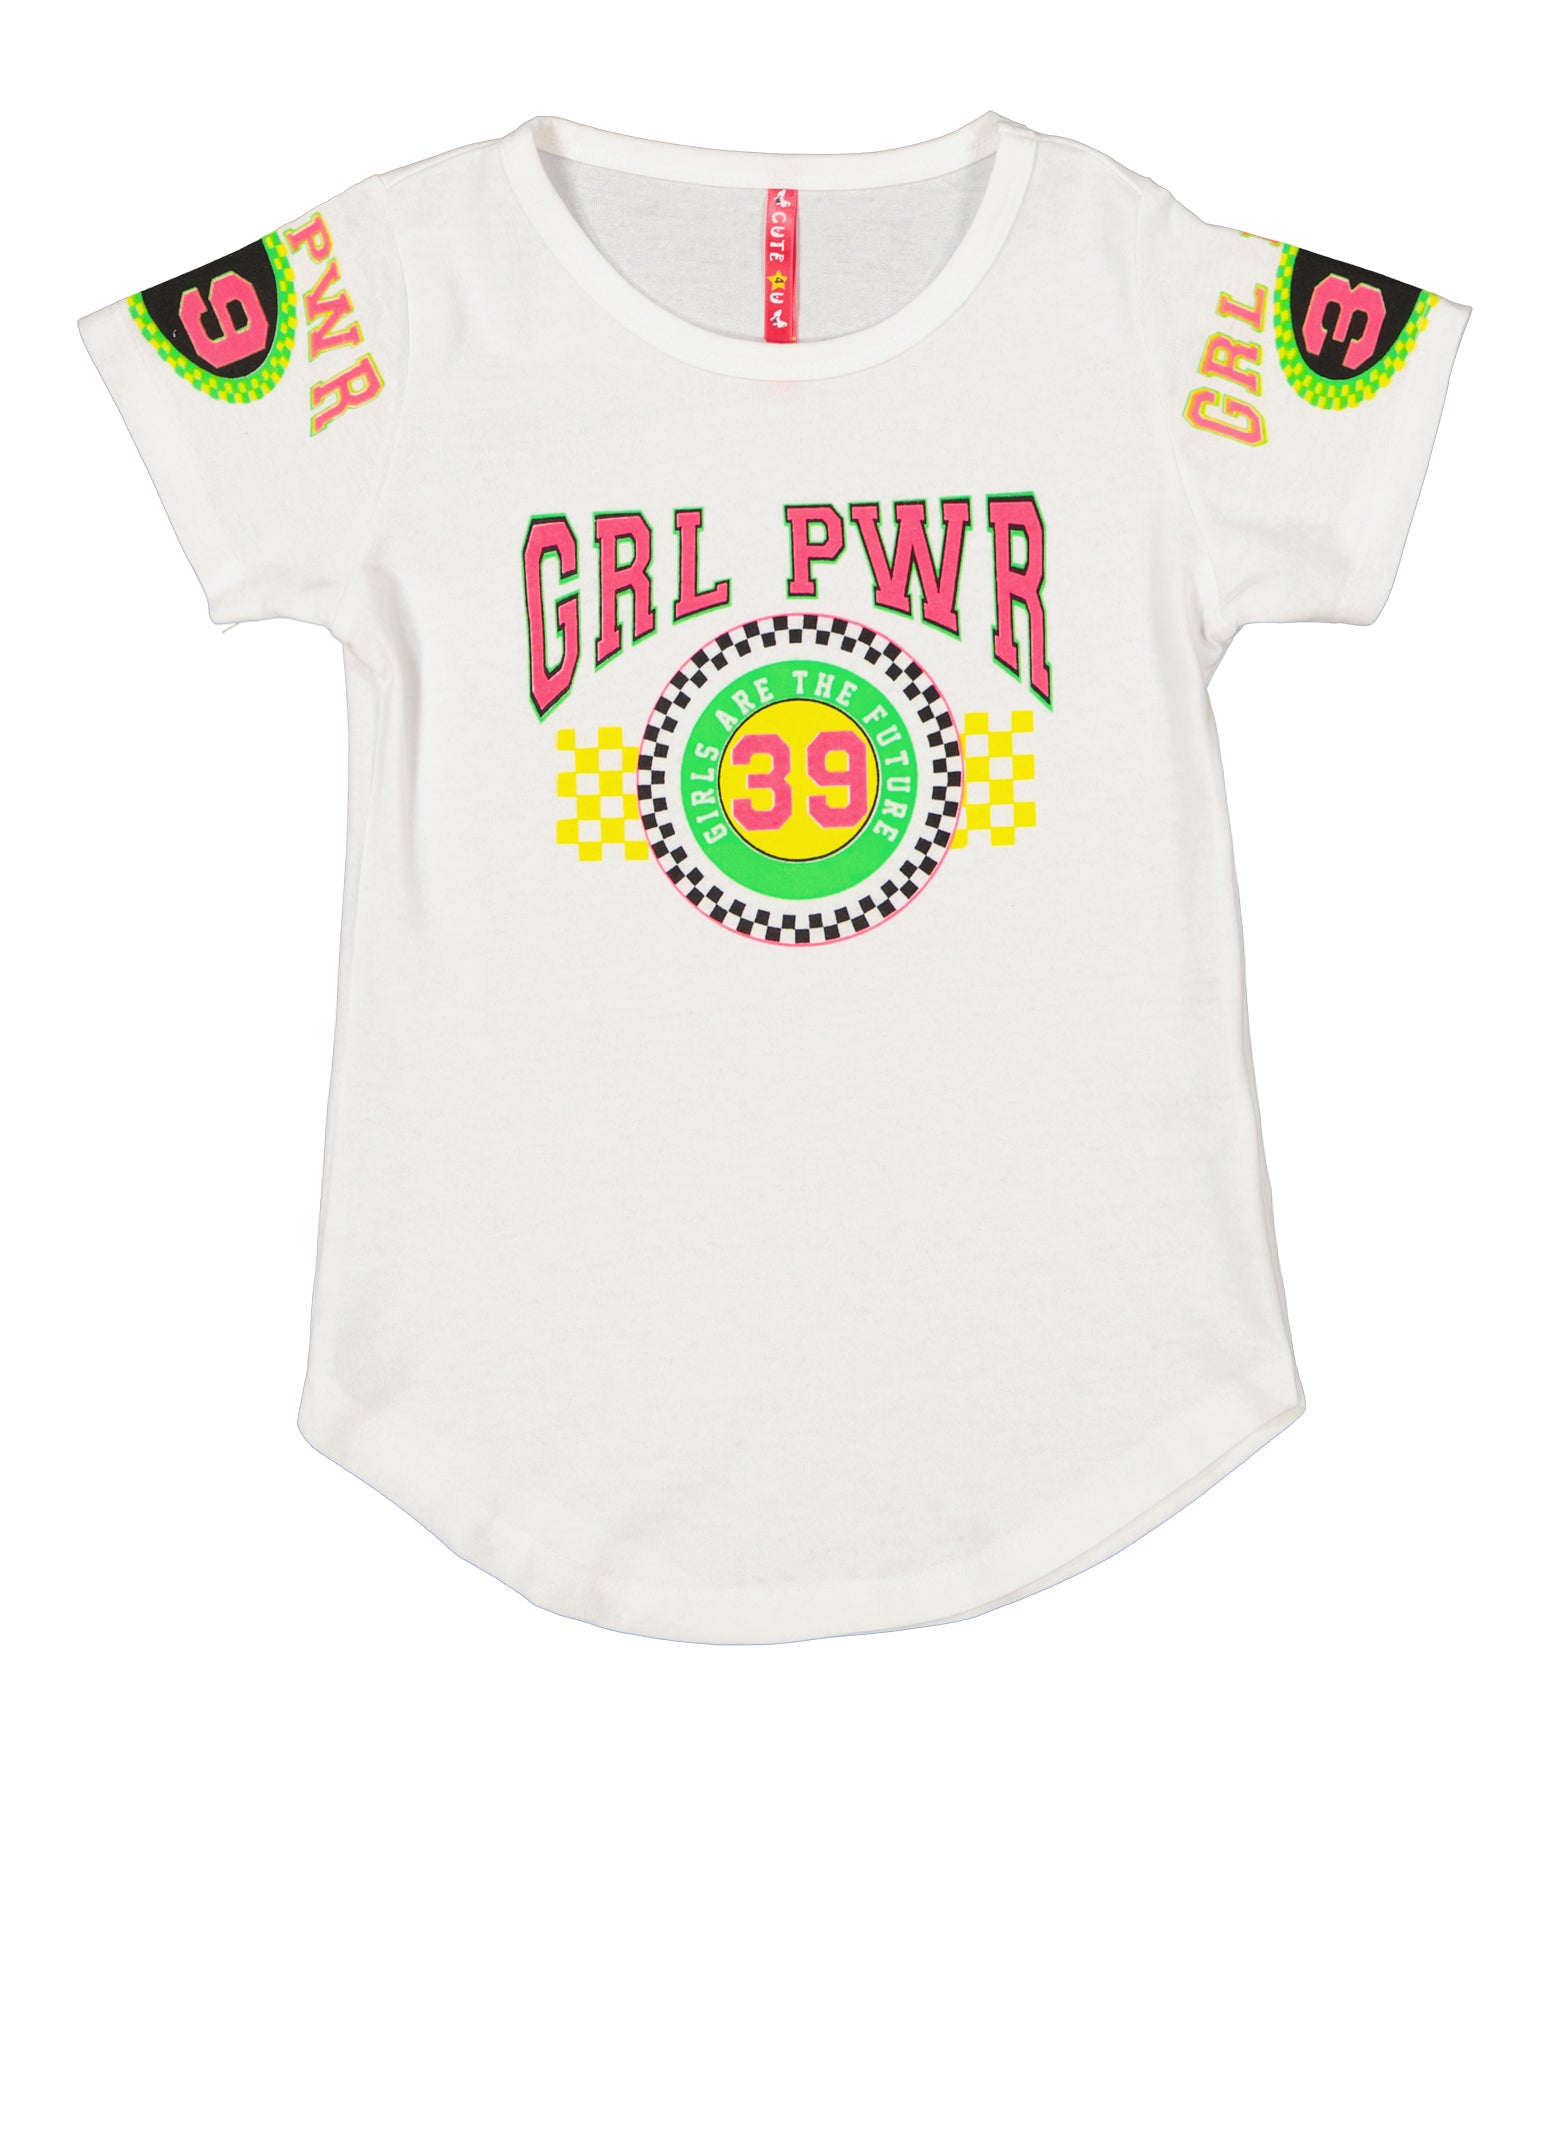 Little Girls Grl Pwr Checkered Graphic Tee, White, Size 4